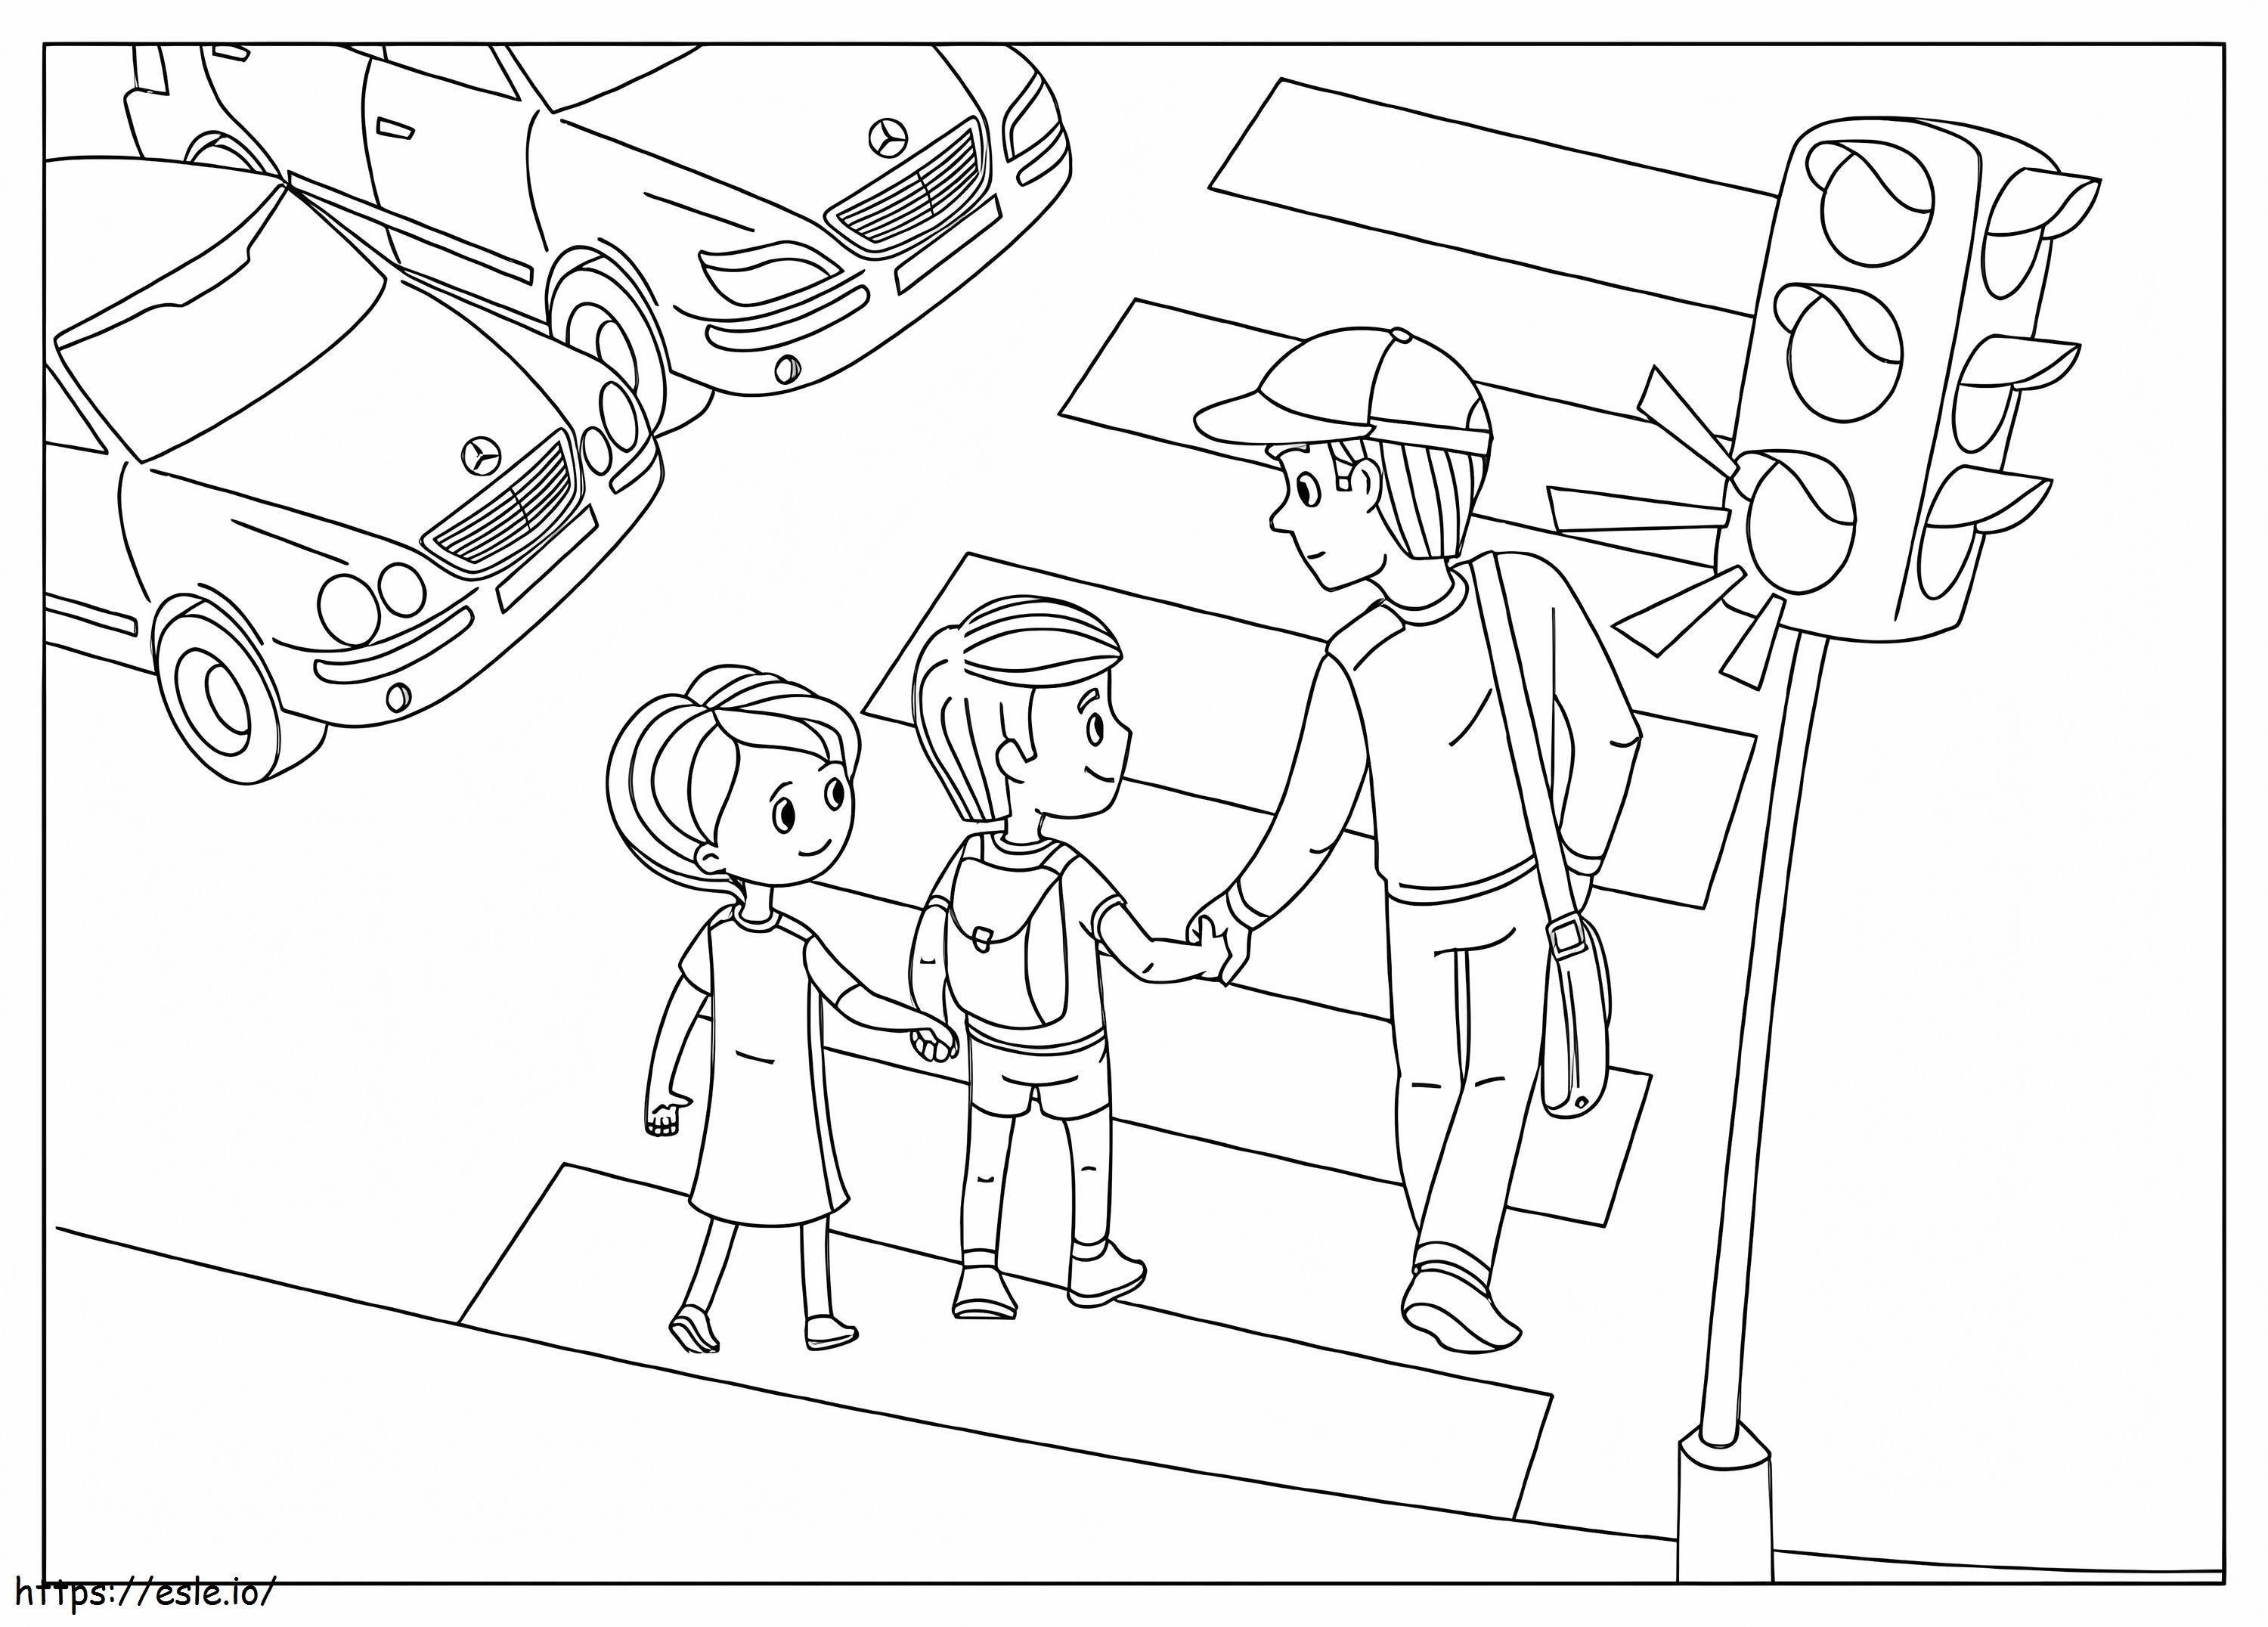 Children Go Green coloring page